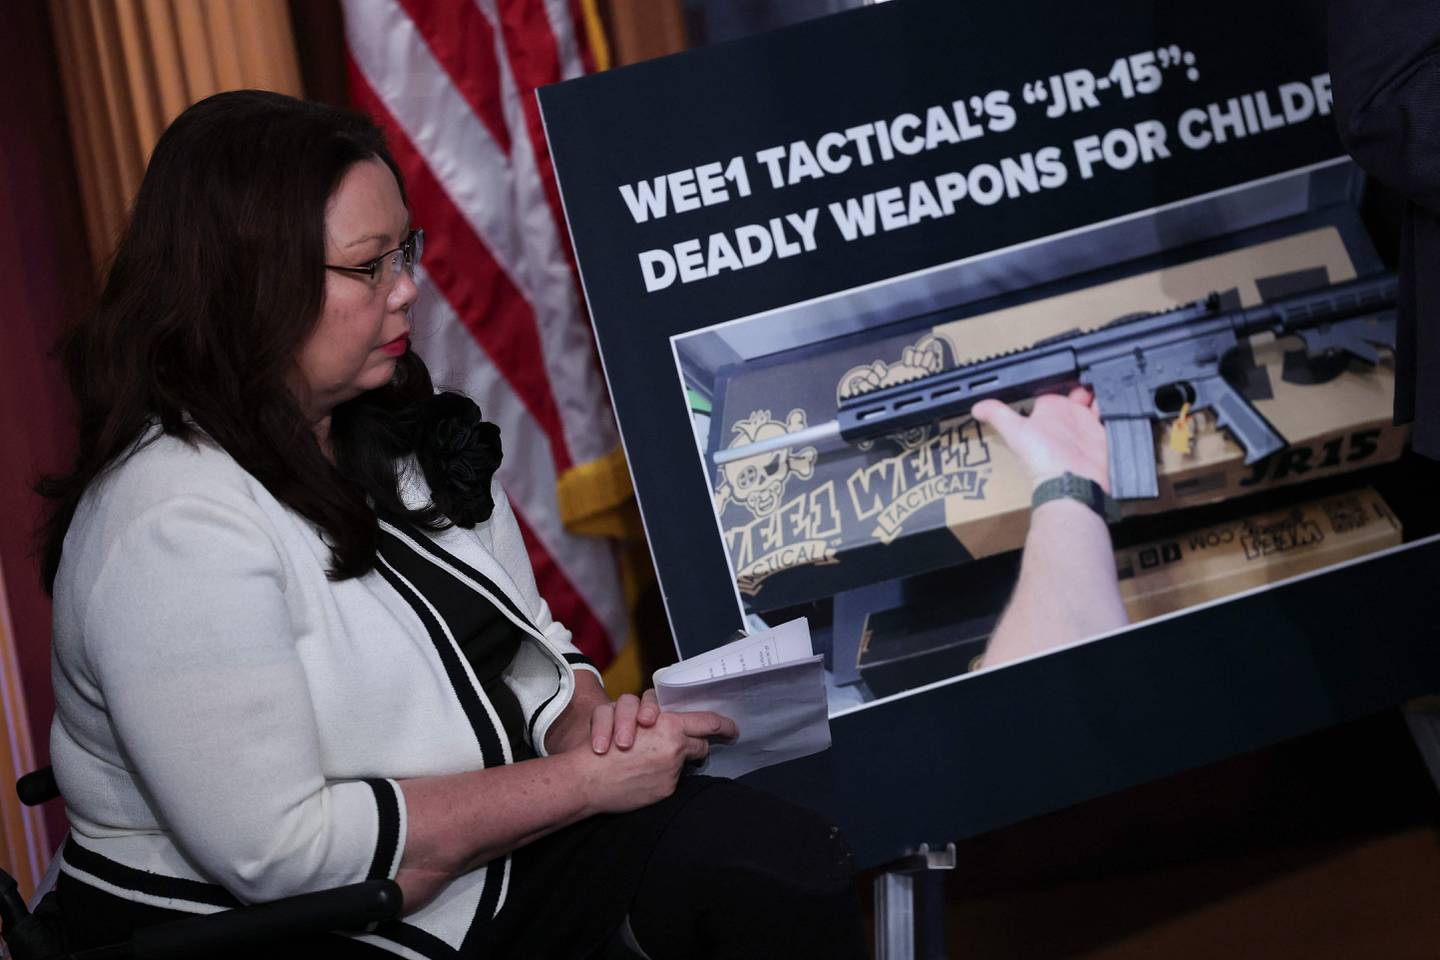 WASHINGTON, DC - JANUARY 26: Sen. Tammy Duckworth (D-IL) joins with other Democratic members of the Senate at a U.S. Capitol press conference condemning WEE1 Tactical's "JR-15" rifle marketed to children January 26, 2023 in Washington, DC. The senators called for an FTC investigation into the company’s practice of marketing firearms to children.   Win McNamee/Getty Images/AFP (Photo by WIN MCNAMEE / GETTY IMAGES NORTH AMERICA / Getty Images via AFP)